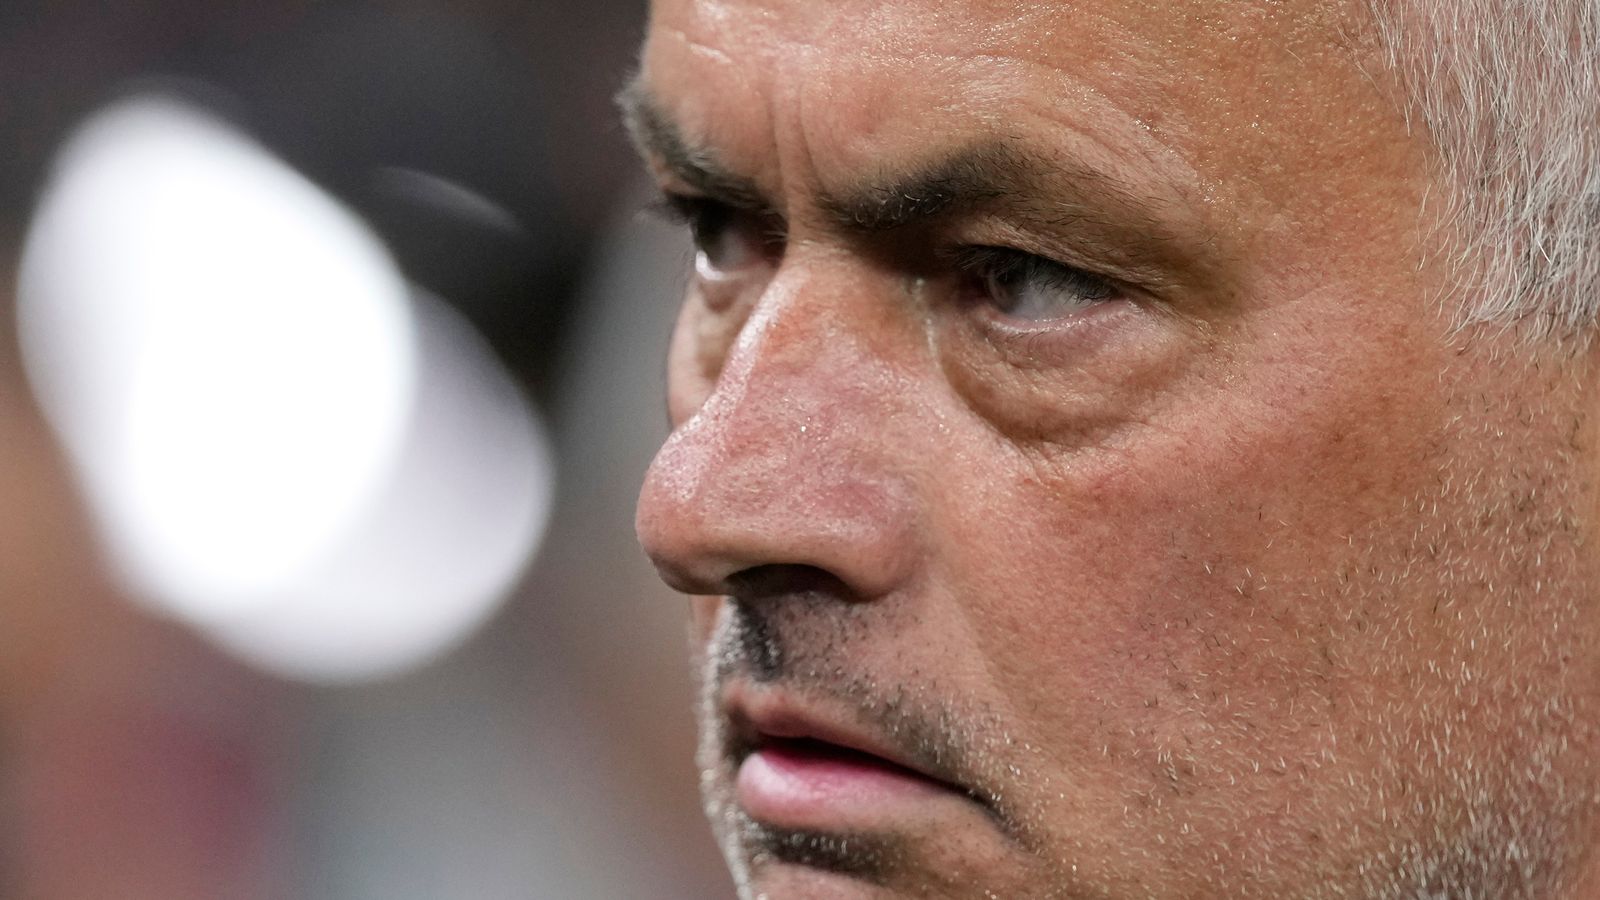 jose-mourinho-rages-at-roma-defeat-but-ugly-europa-league-scenes-taint-legacy-of-serial-winner-who-stopped-winning